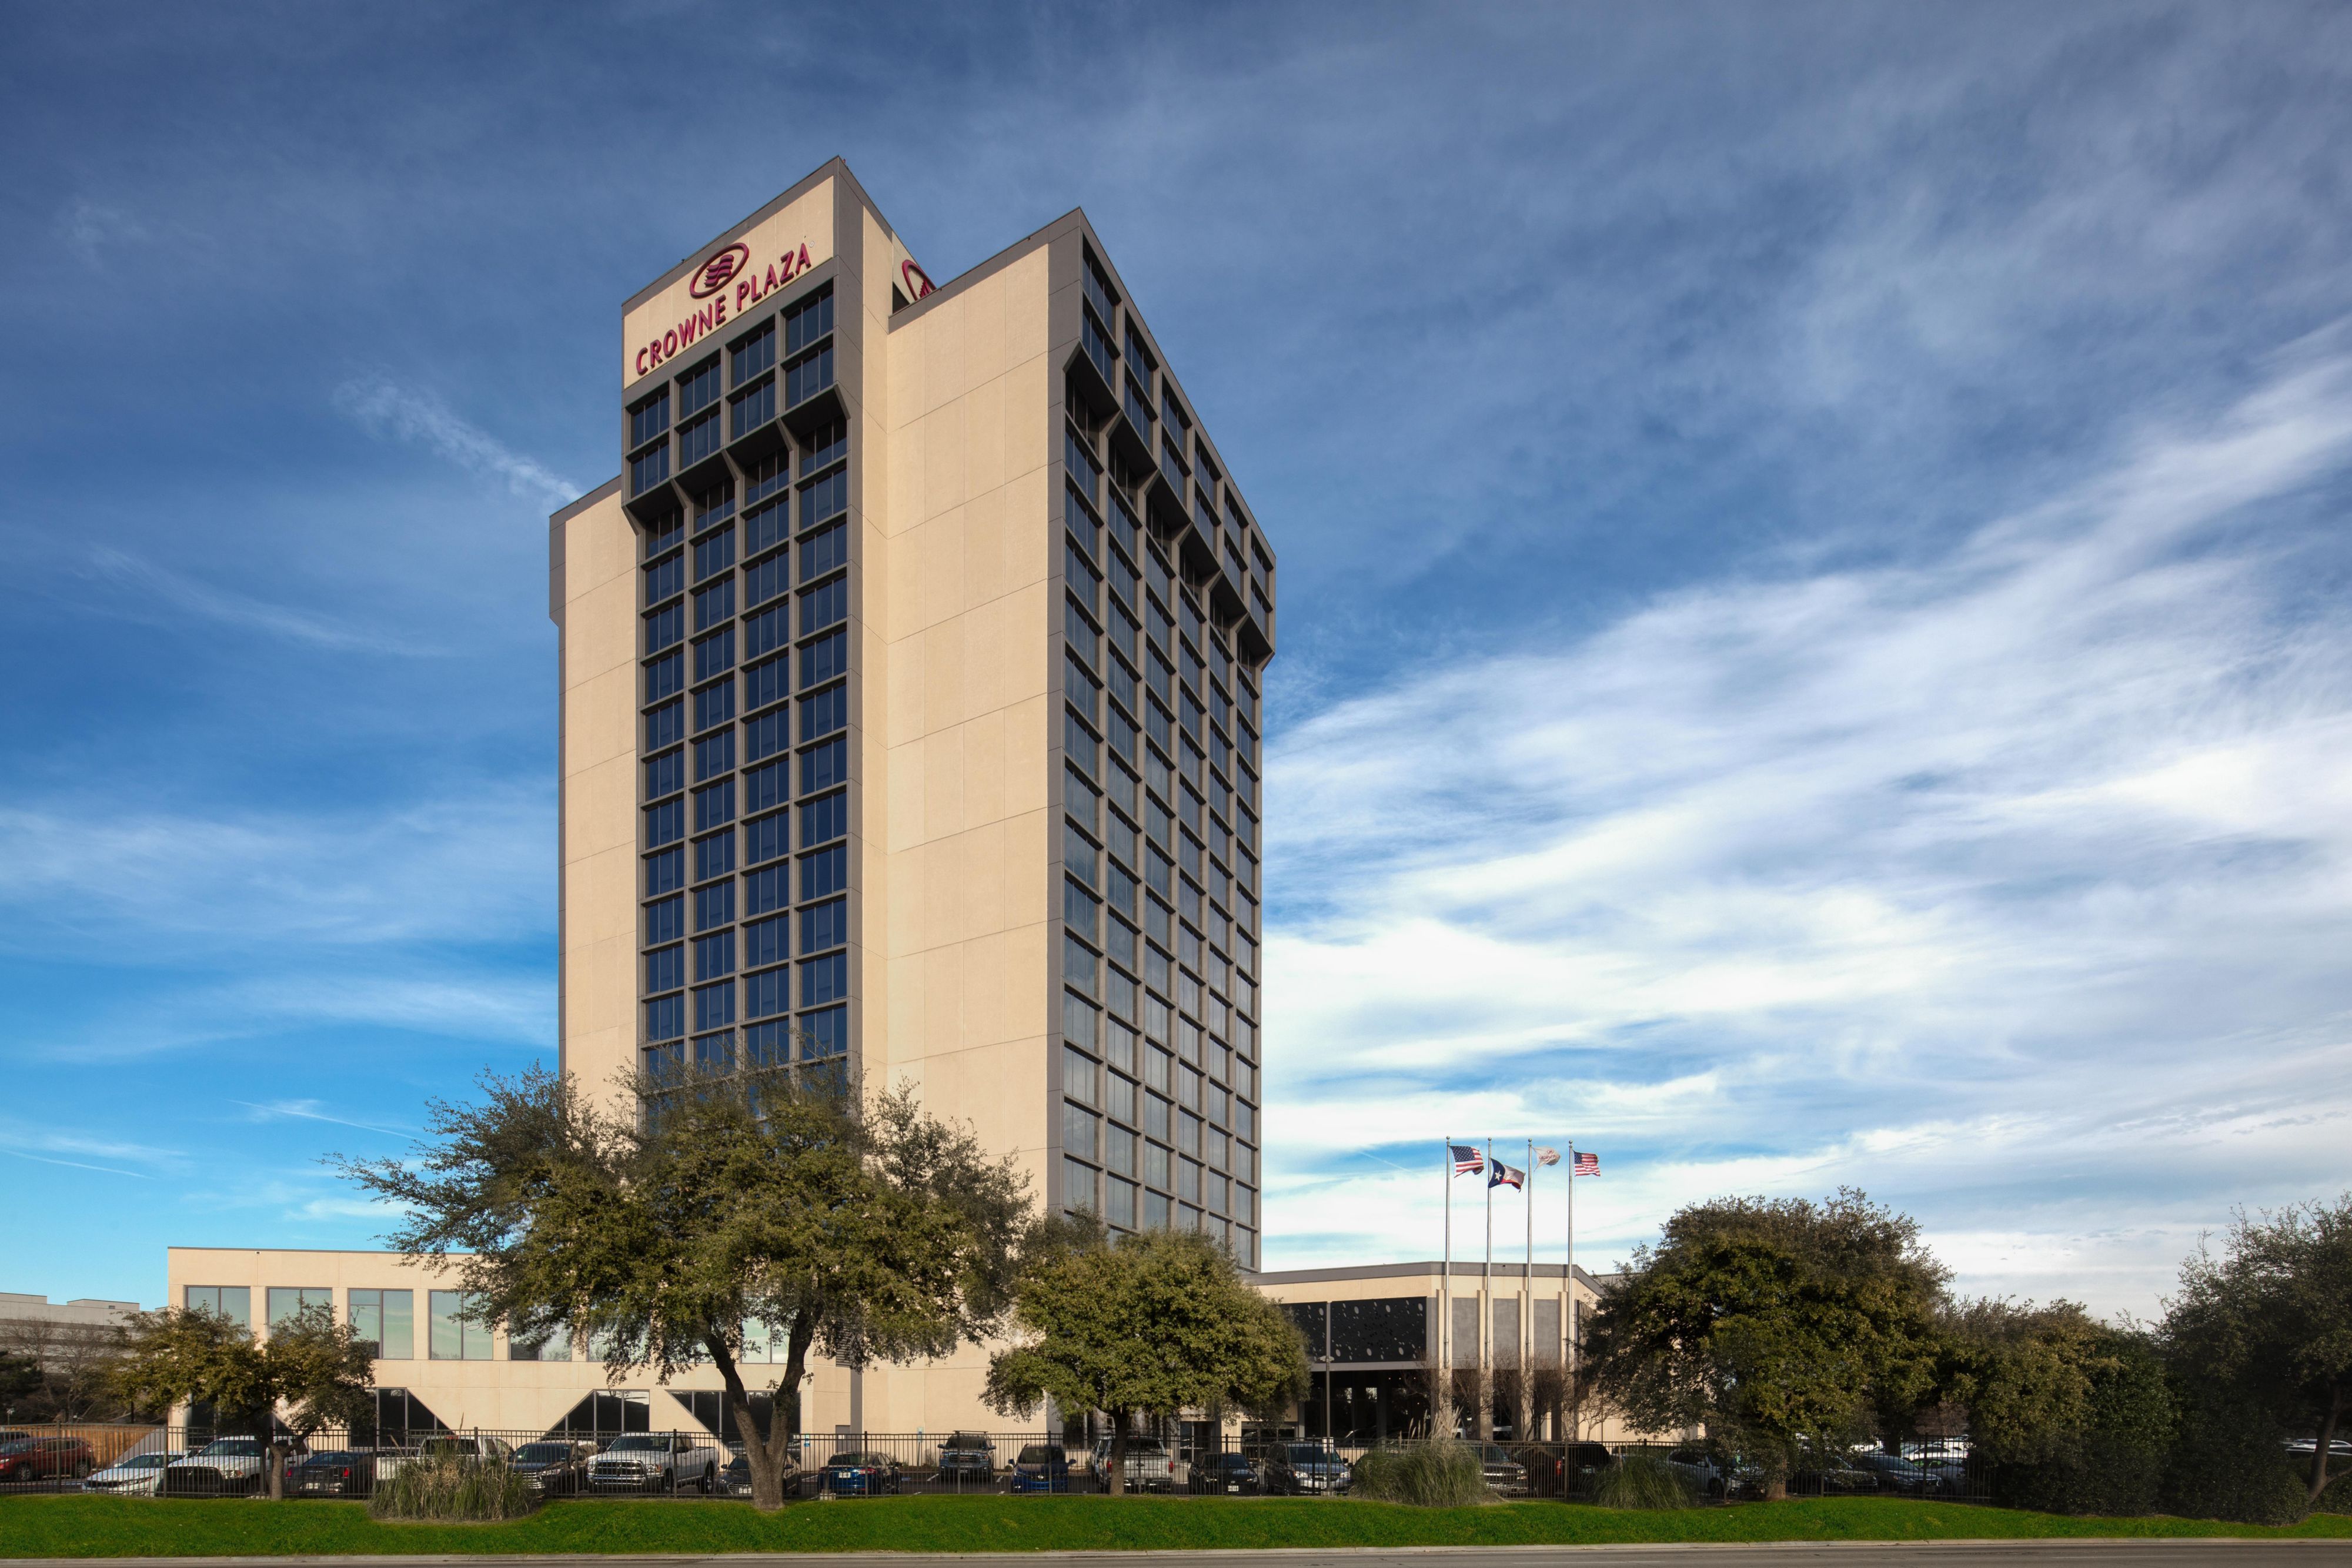 Our Dallas hotel has been been given a brand new look!